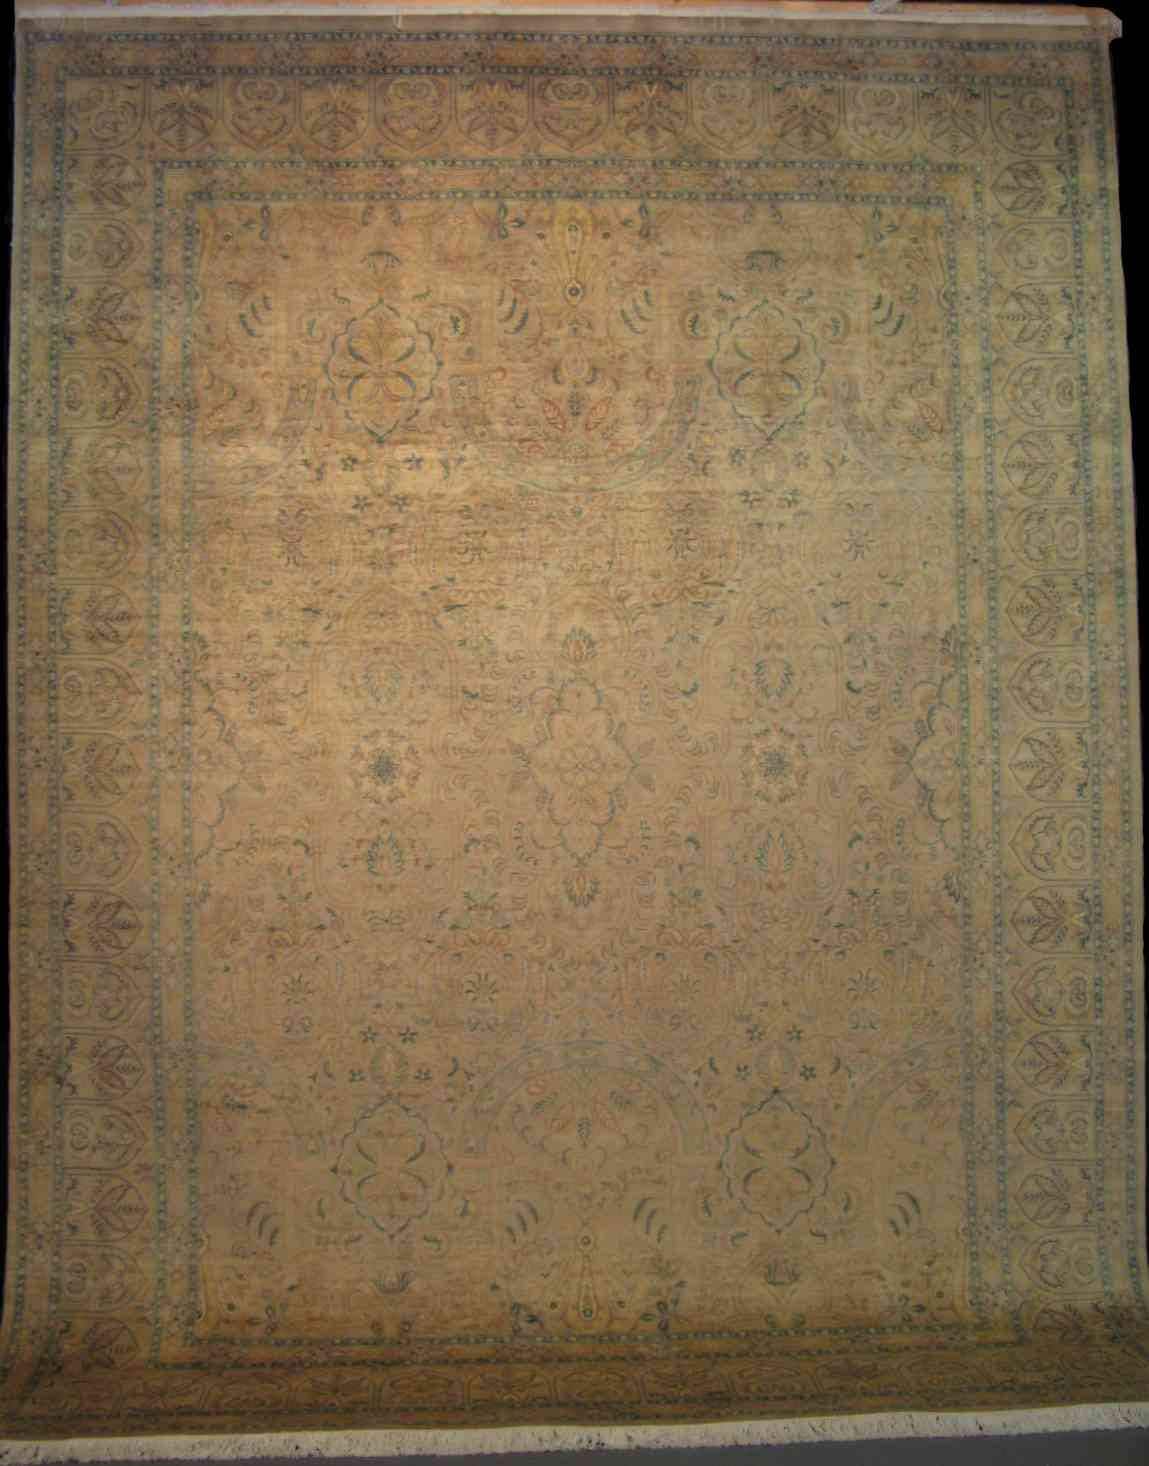 Tauris Nagshe - Arts & Crafts by William Morris Carpet | 12' x 9' | Home Decor | Hand-Knotted Area Rug